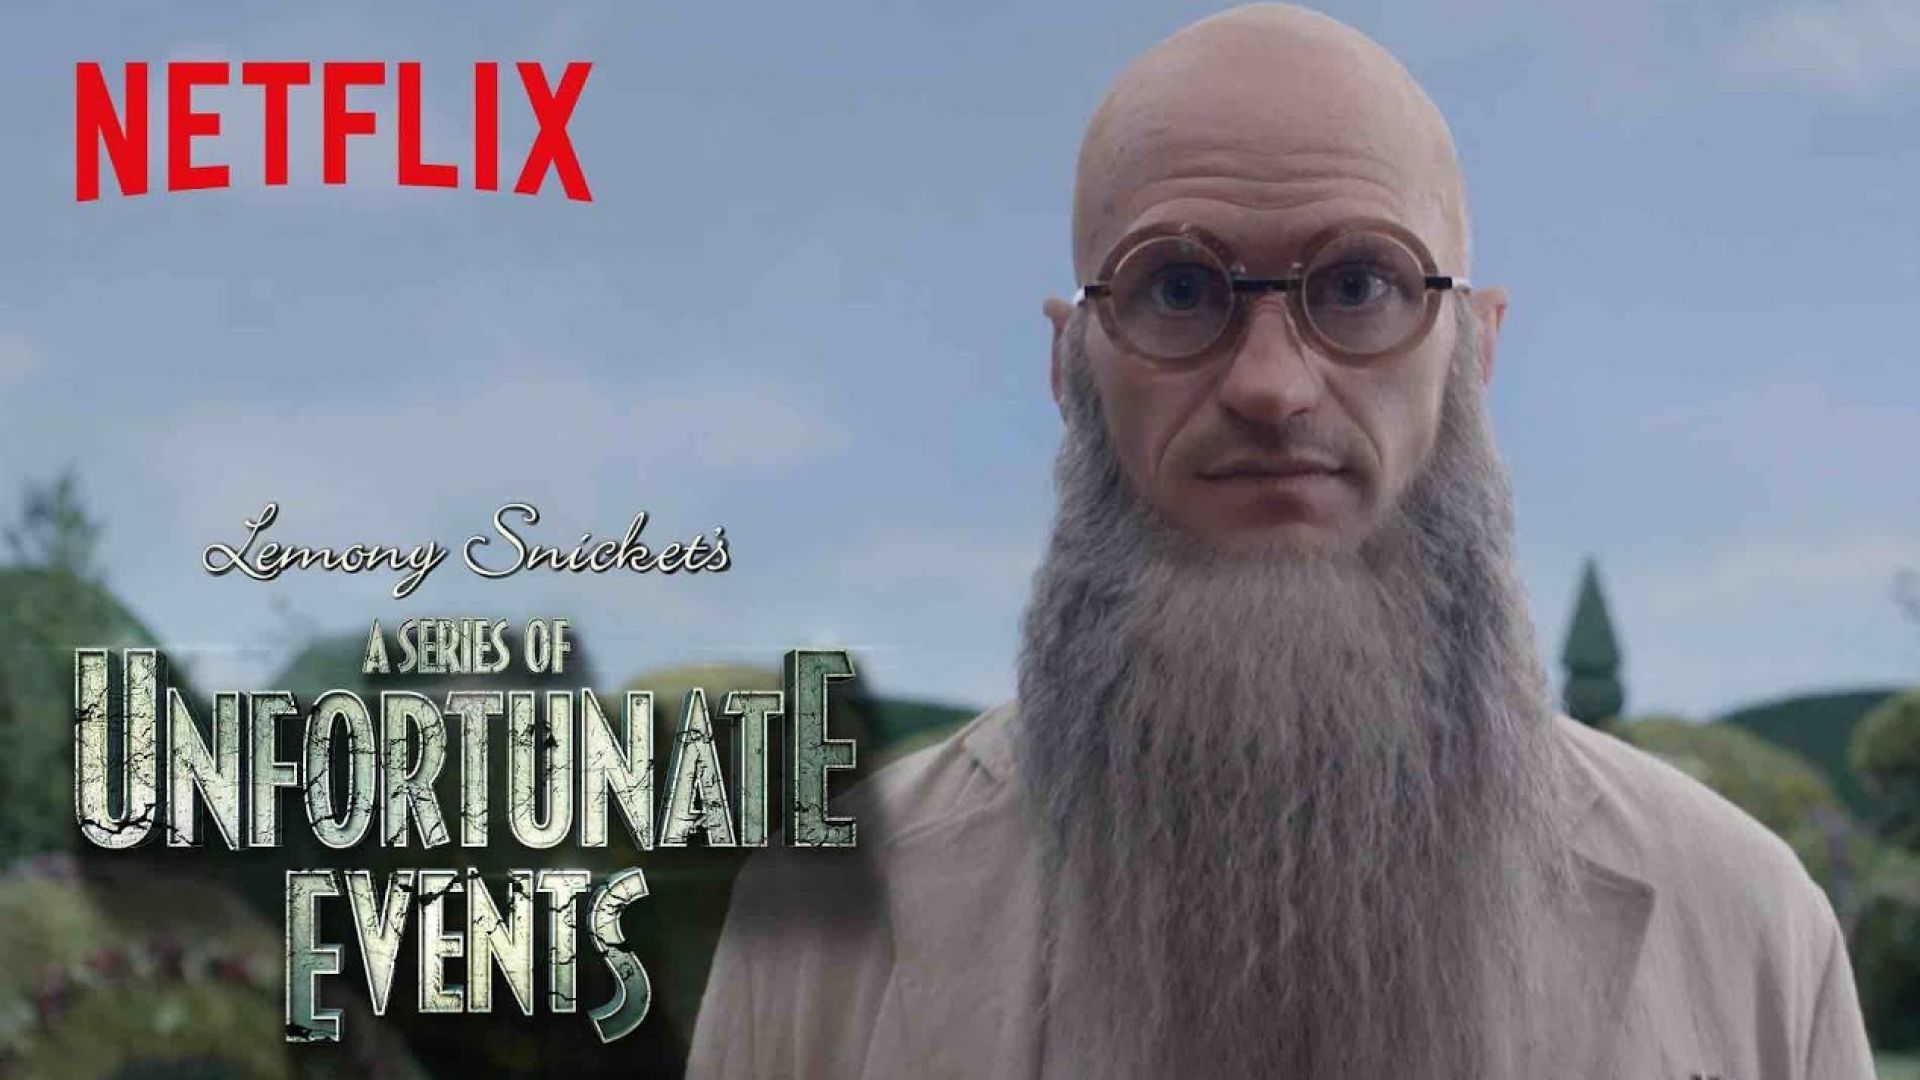 Take a closer look at A Series of Unfortunate Events with th